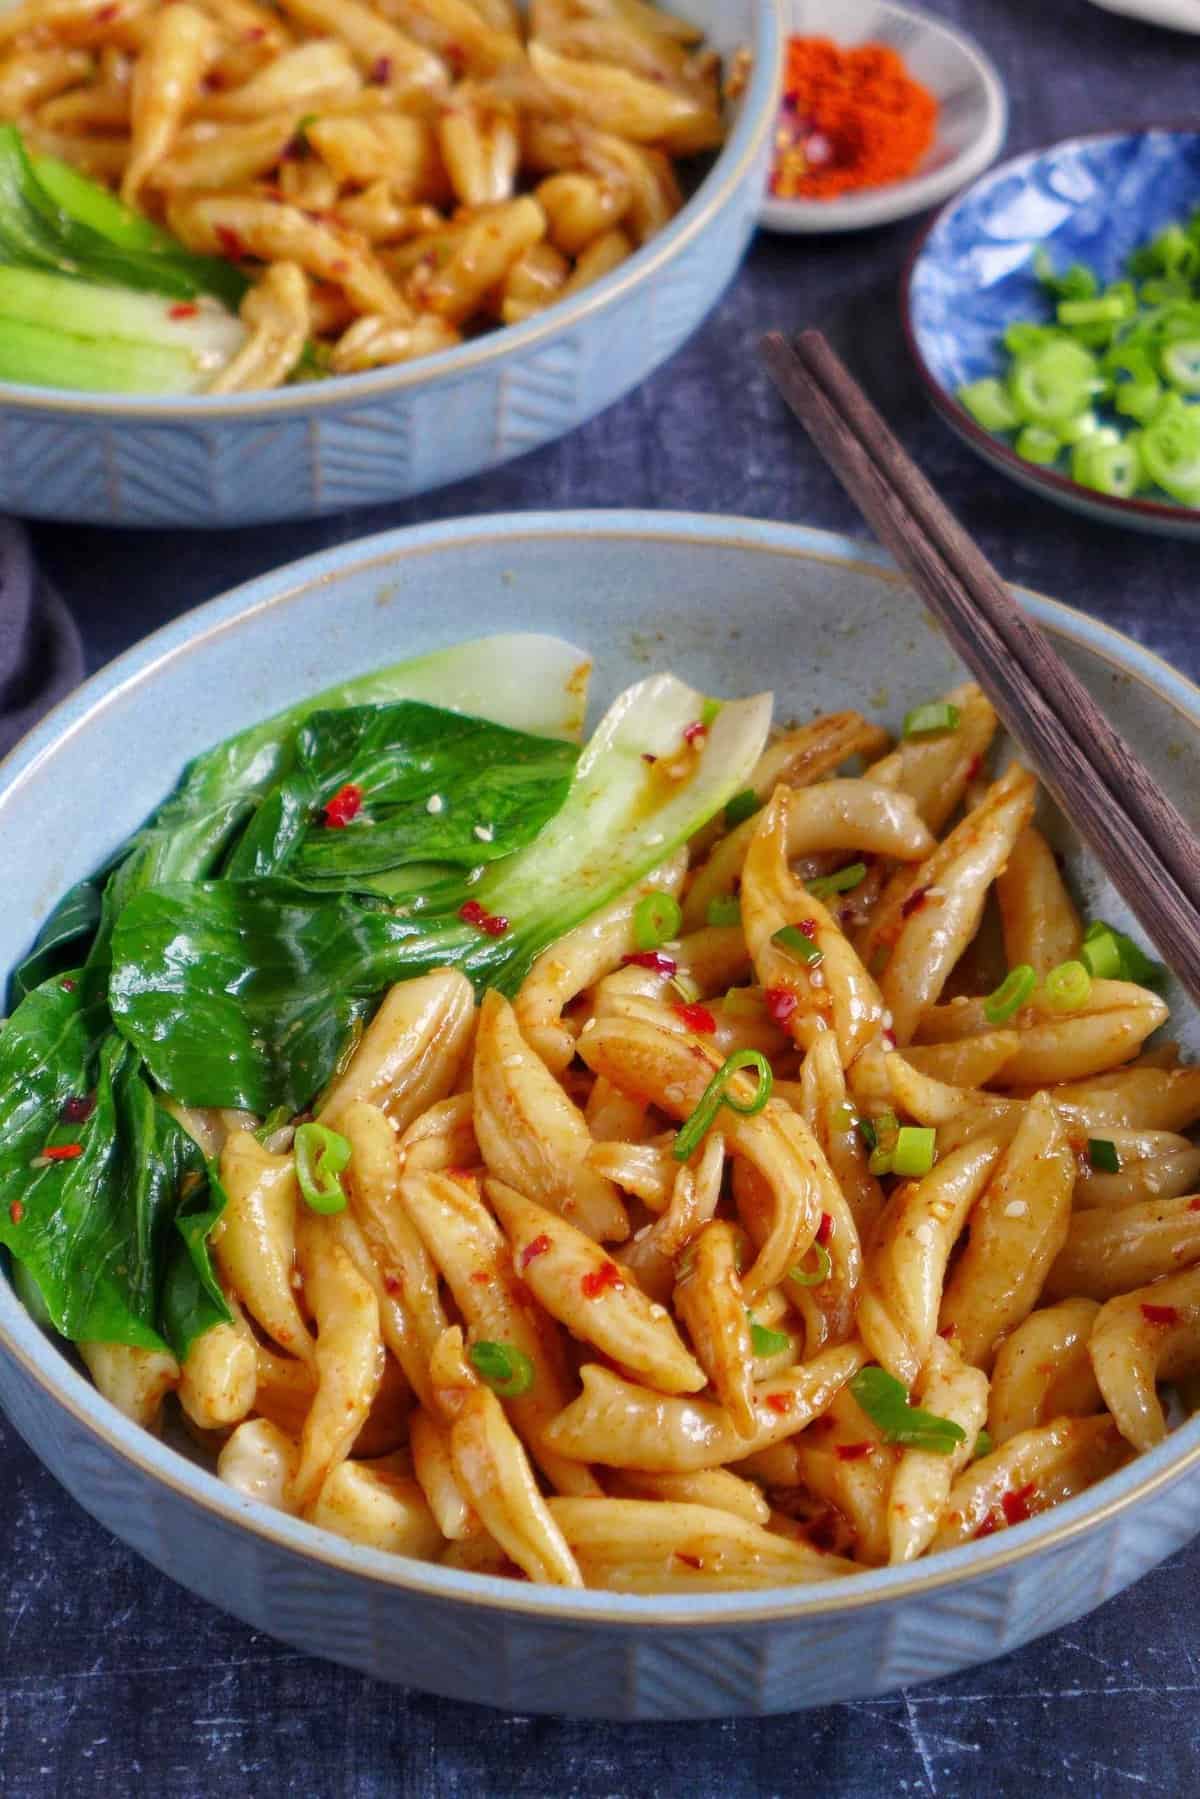 Scissor cut noodles with a spicy dressing